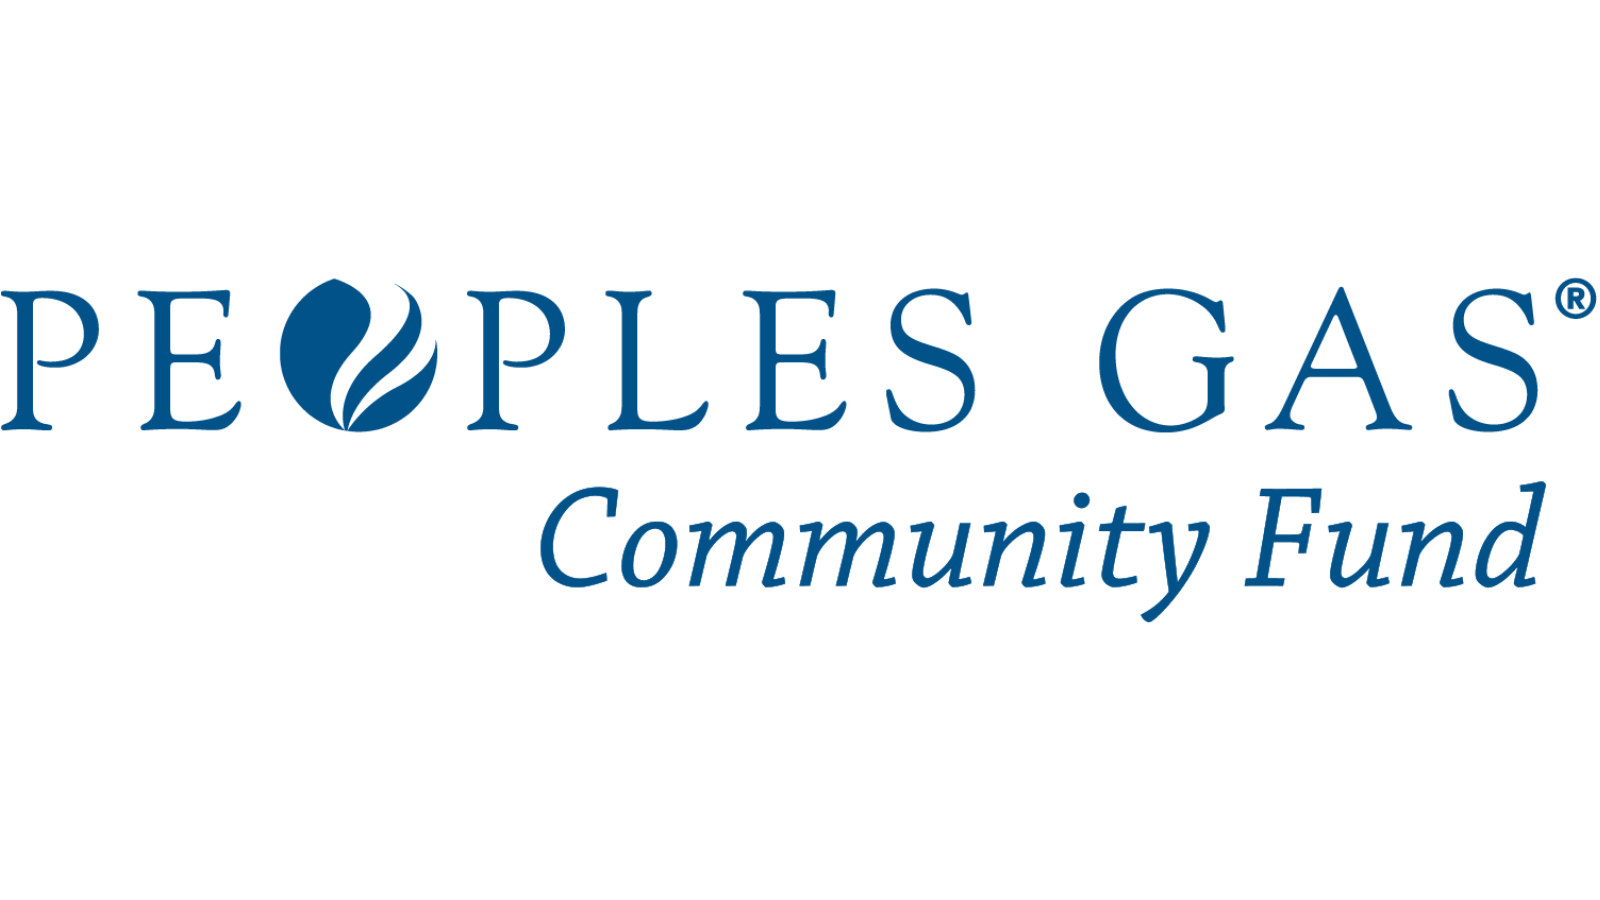 Peoples Gas Community Fund